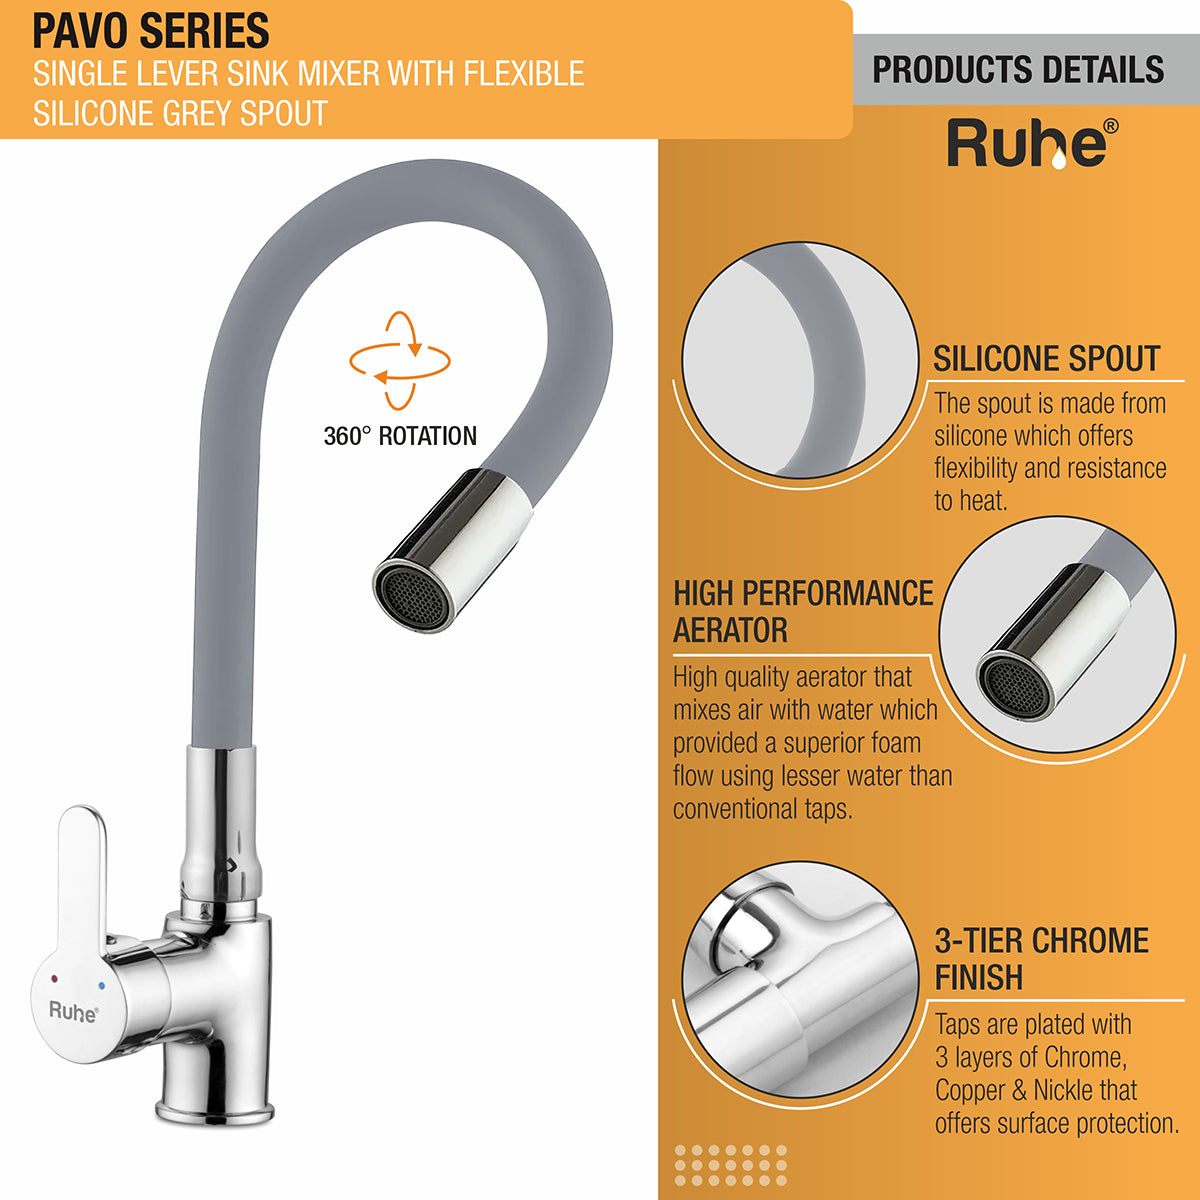 Pavo Single Lever Sink Mixer with Silicone Grey Flexible Spout product details